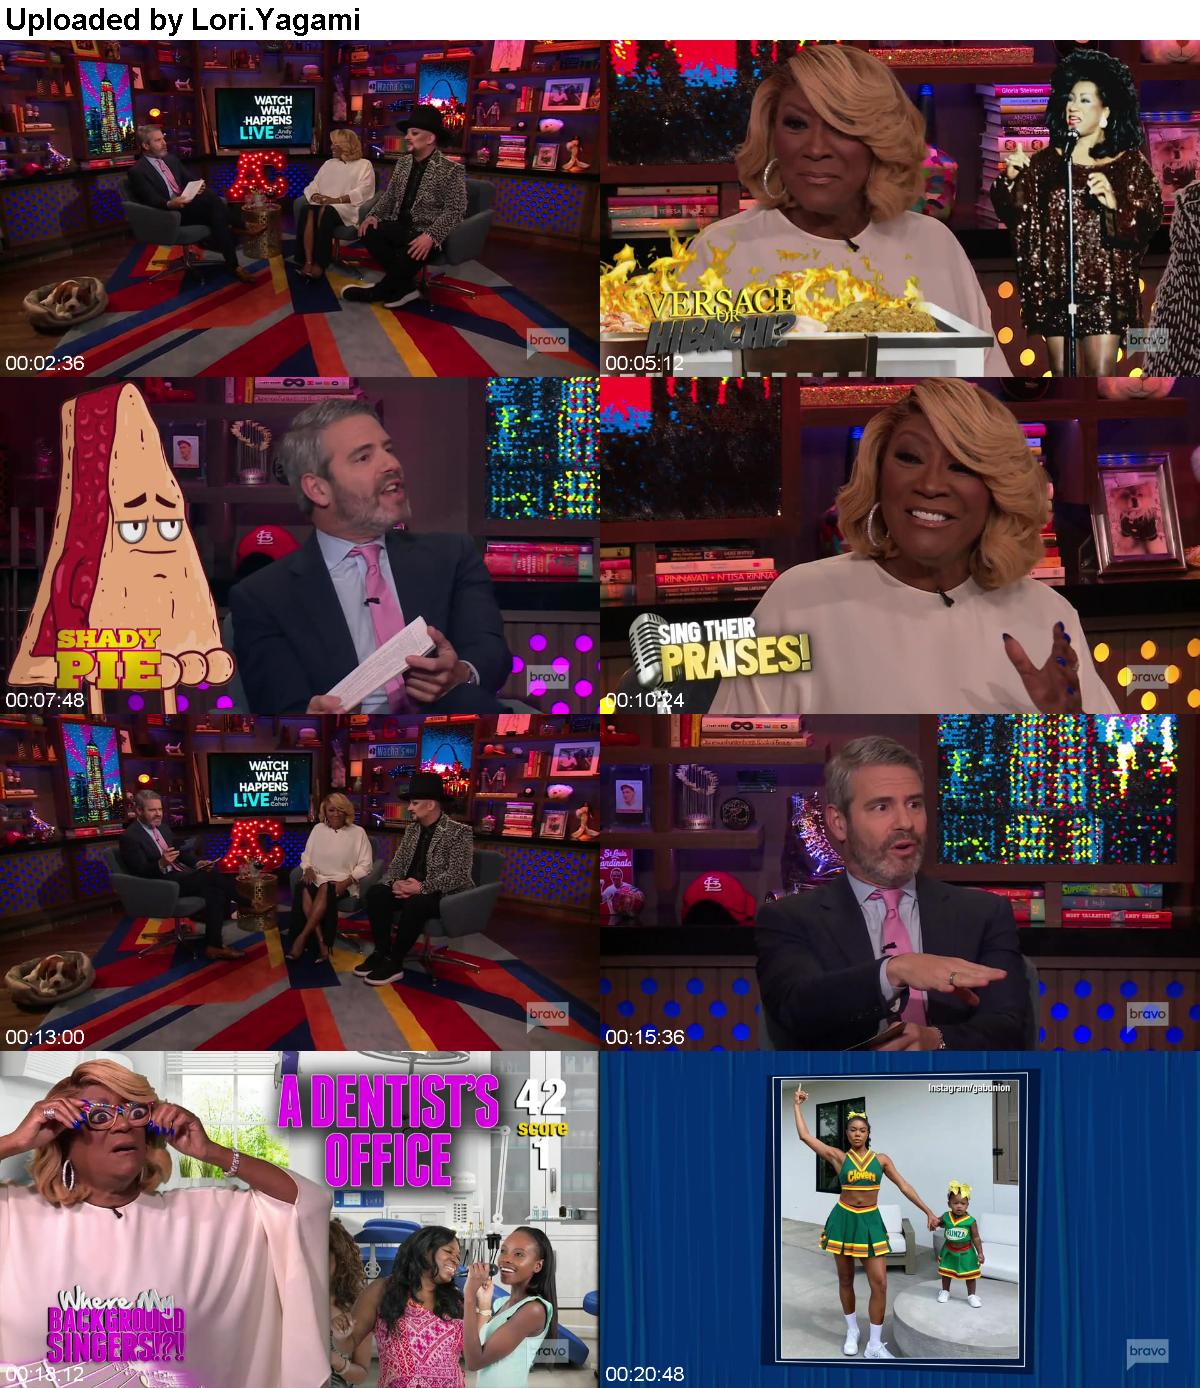 Watch What Happens Live 2019 10 28 Patti Labelle and Boy George WEB x264-COOKIEMONSTER